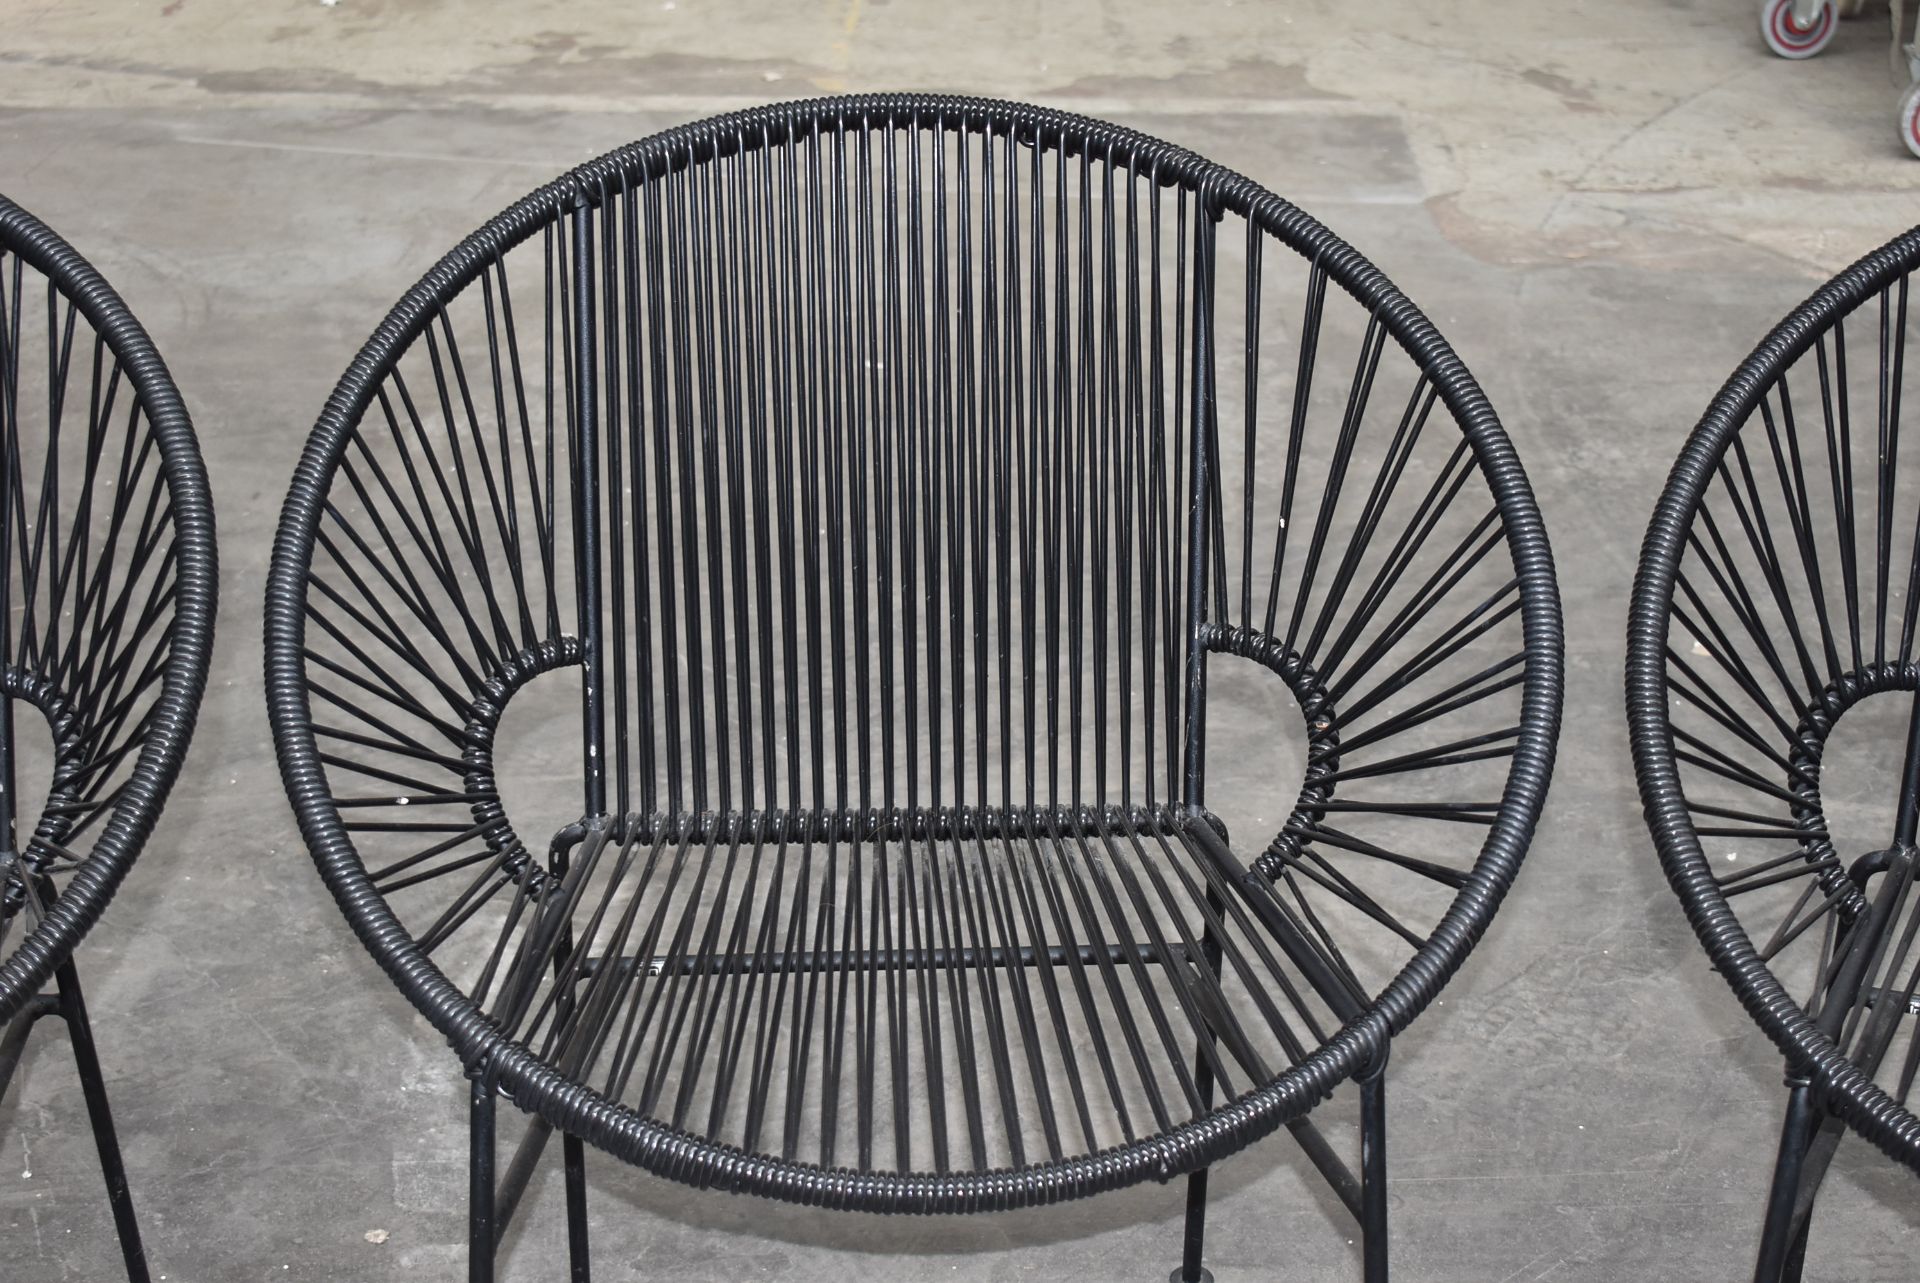 4 x Innit Designer Chairs - Acapulco Style Chairs in Black Suitable For Indoor or Outdoor Use - - Image 10 of 10